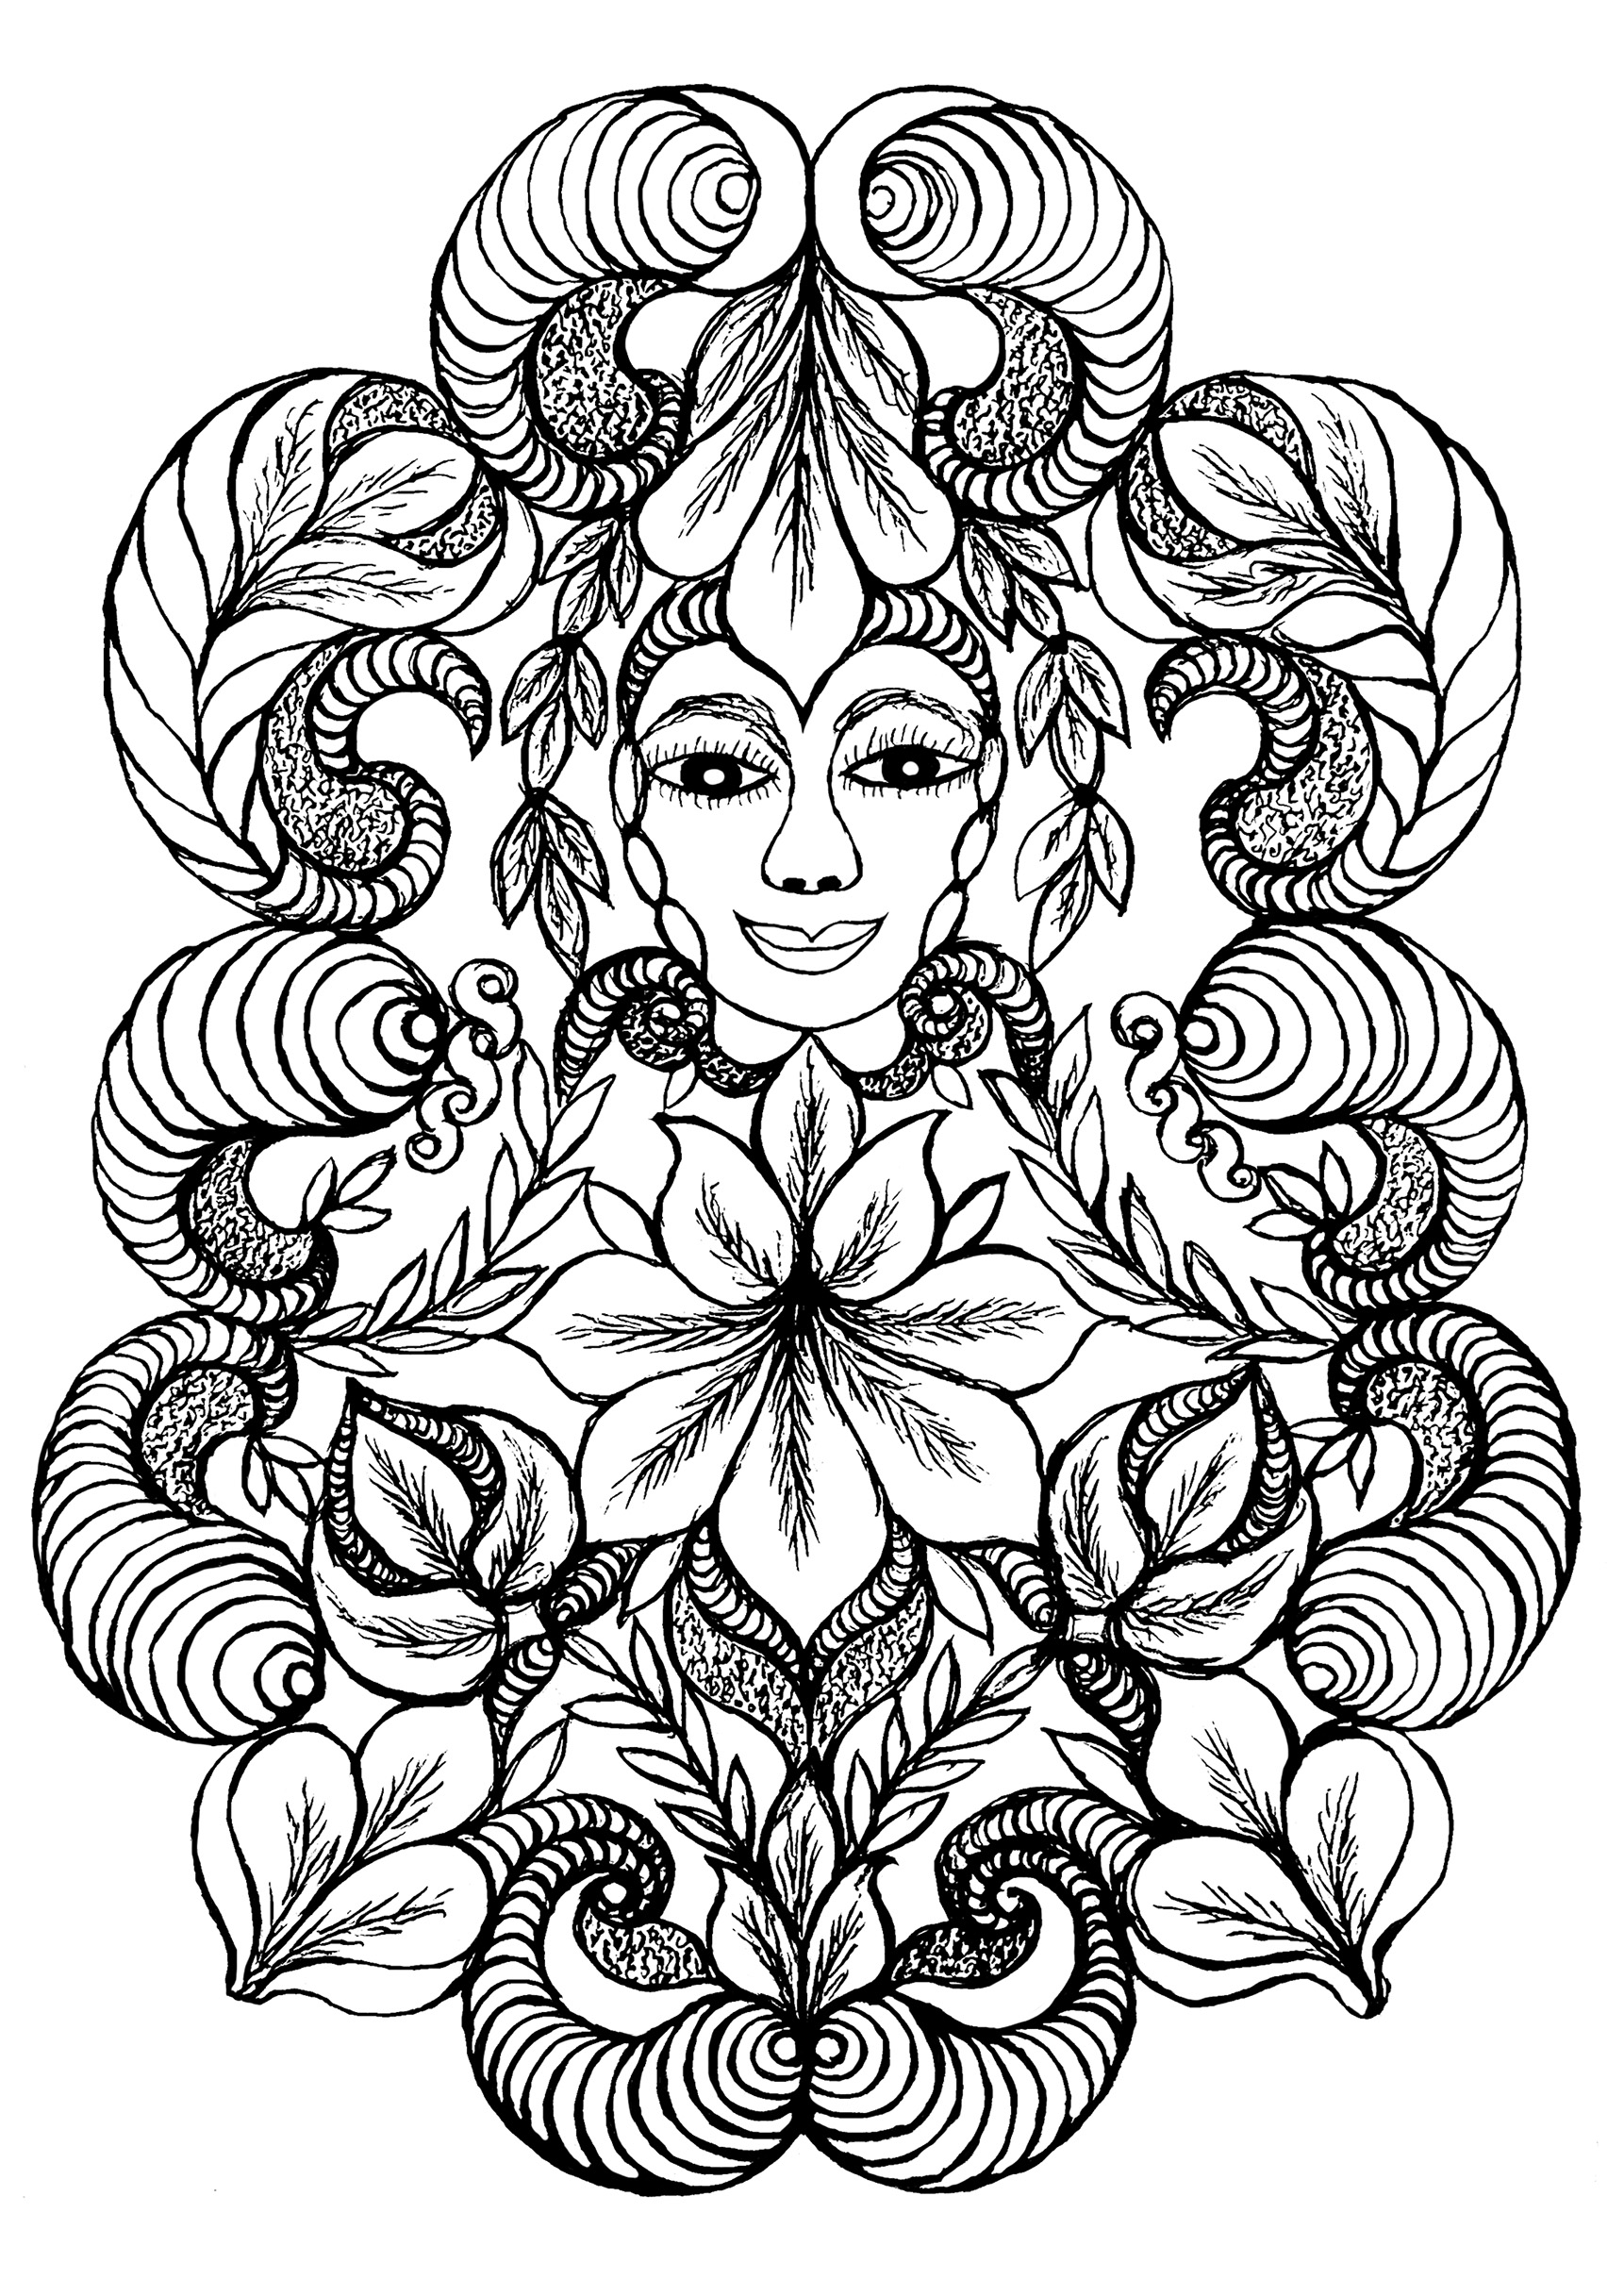 Flower Woman: an exclusive coloring page inspired by the paintings of Minnie Evans. O, Artist : Art. Isabelle